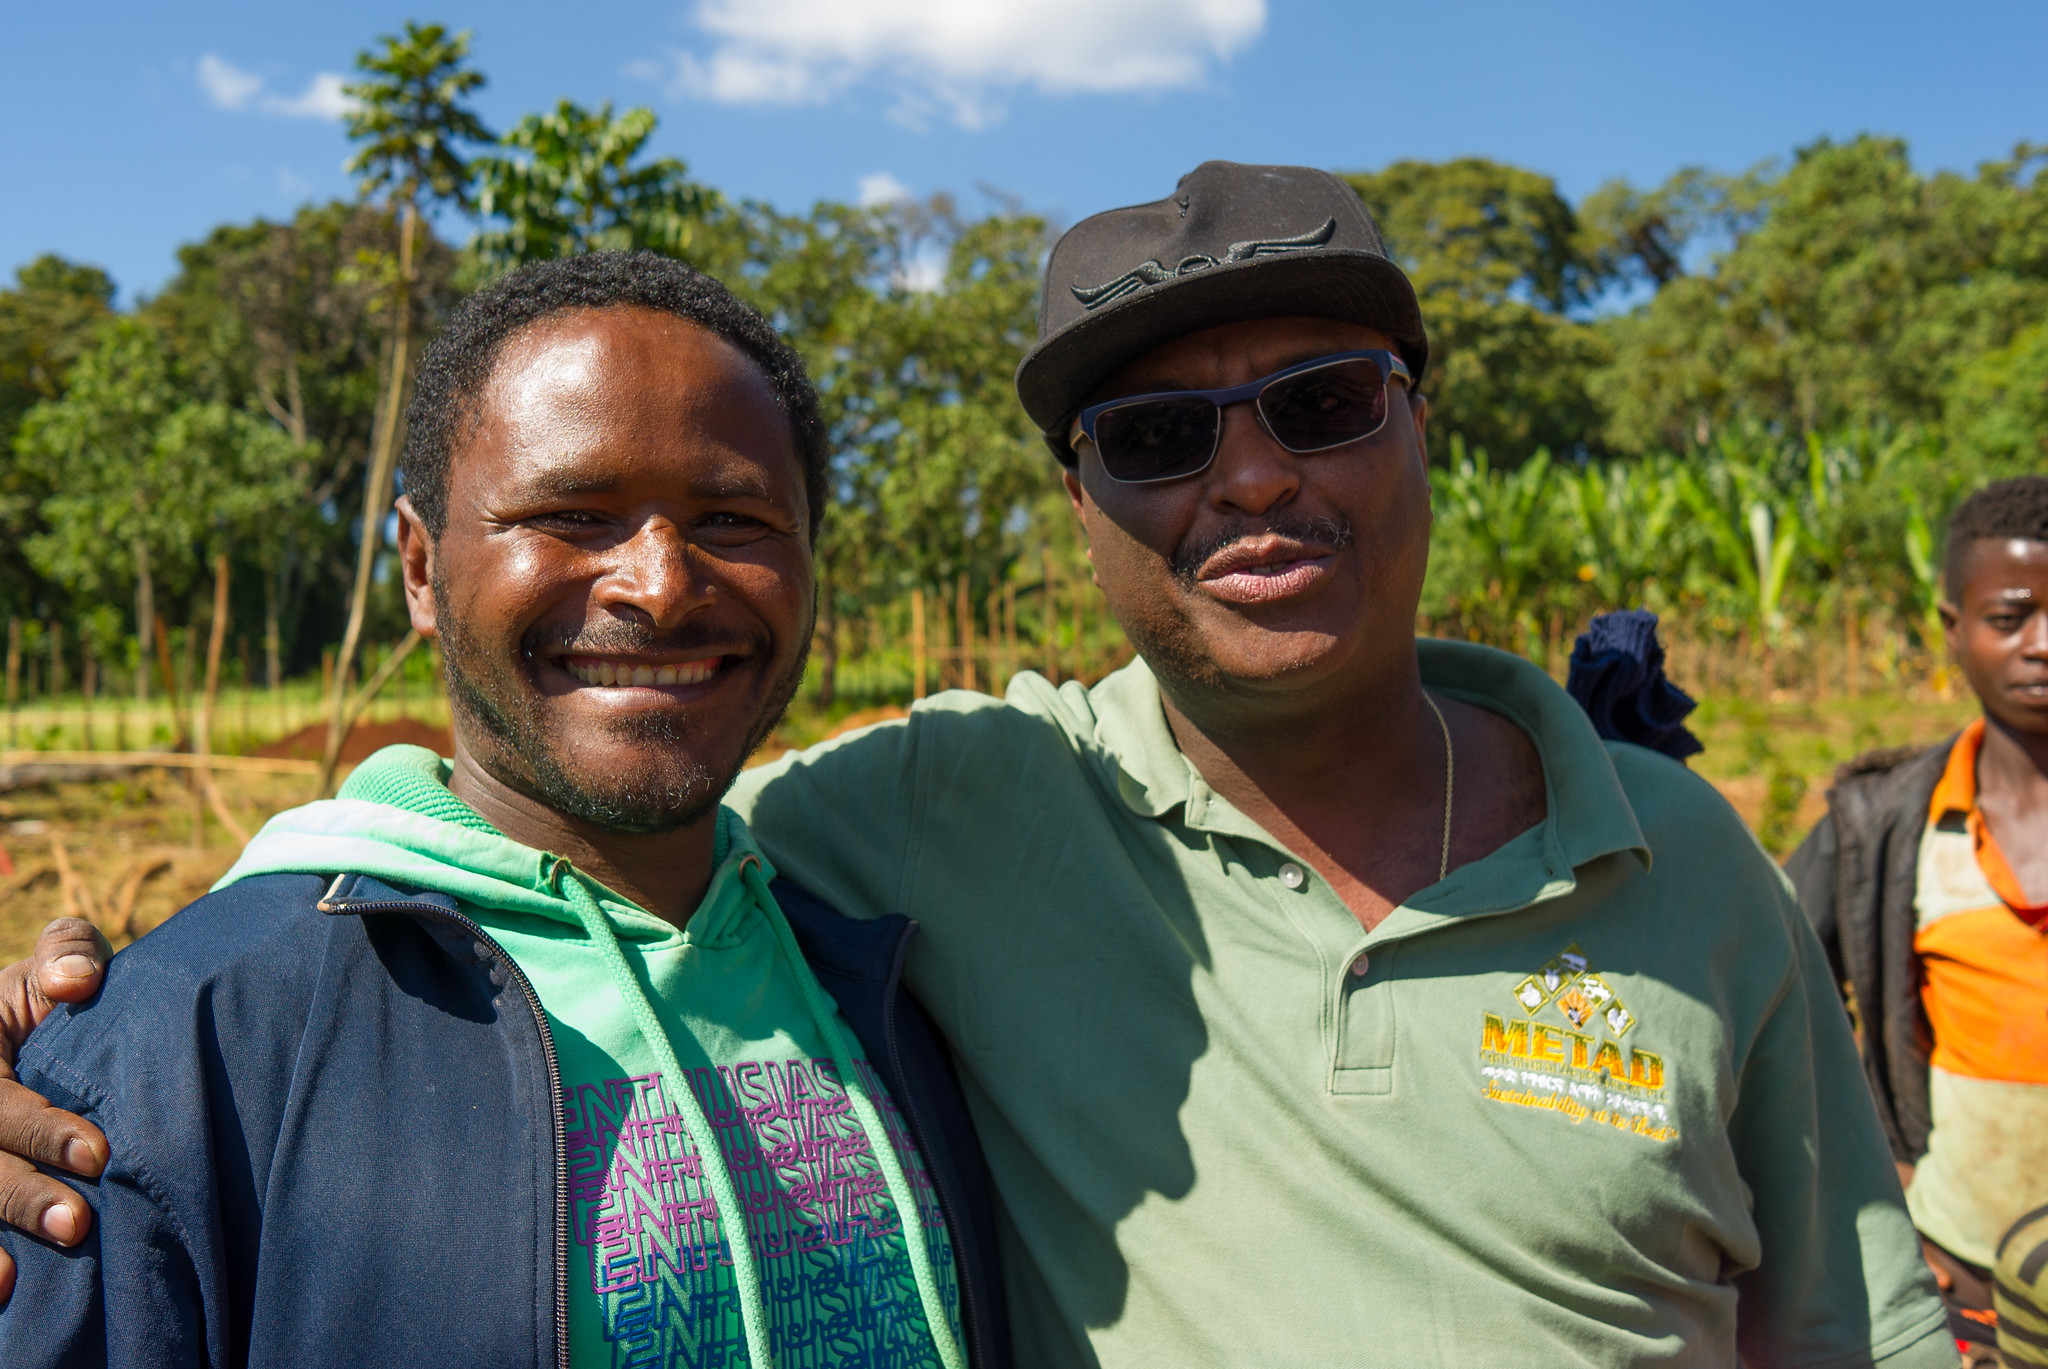 Here we have Etassu and Aman. Etassu is a lead farmer in Bente Nenqa. He is in charge of training 40 farmers. What an Enthusiastic guy.